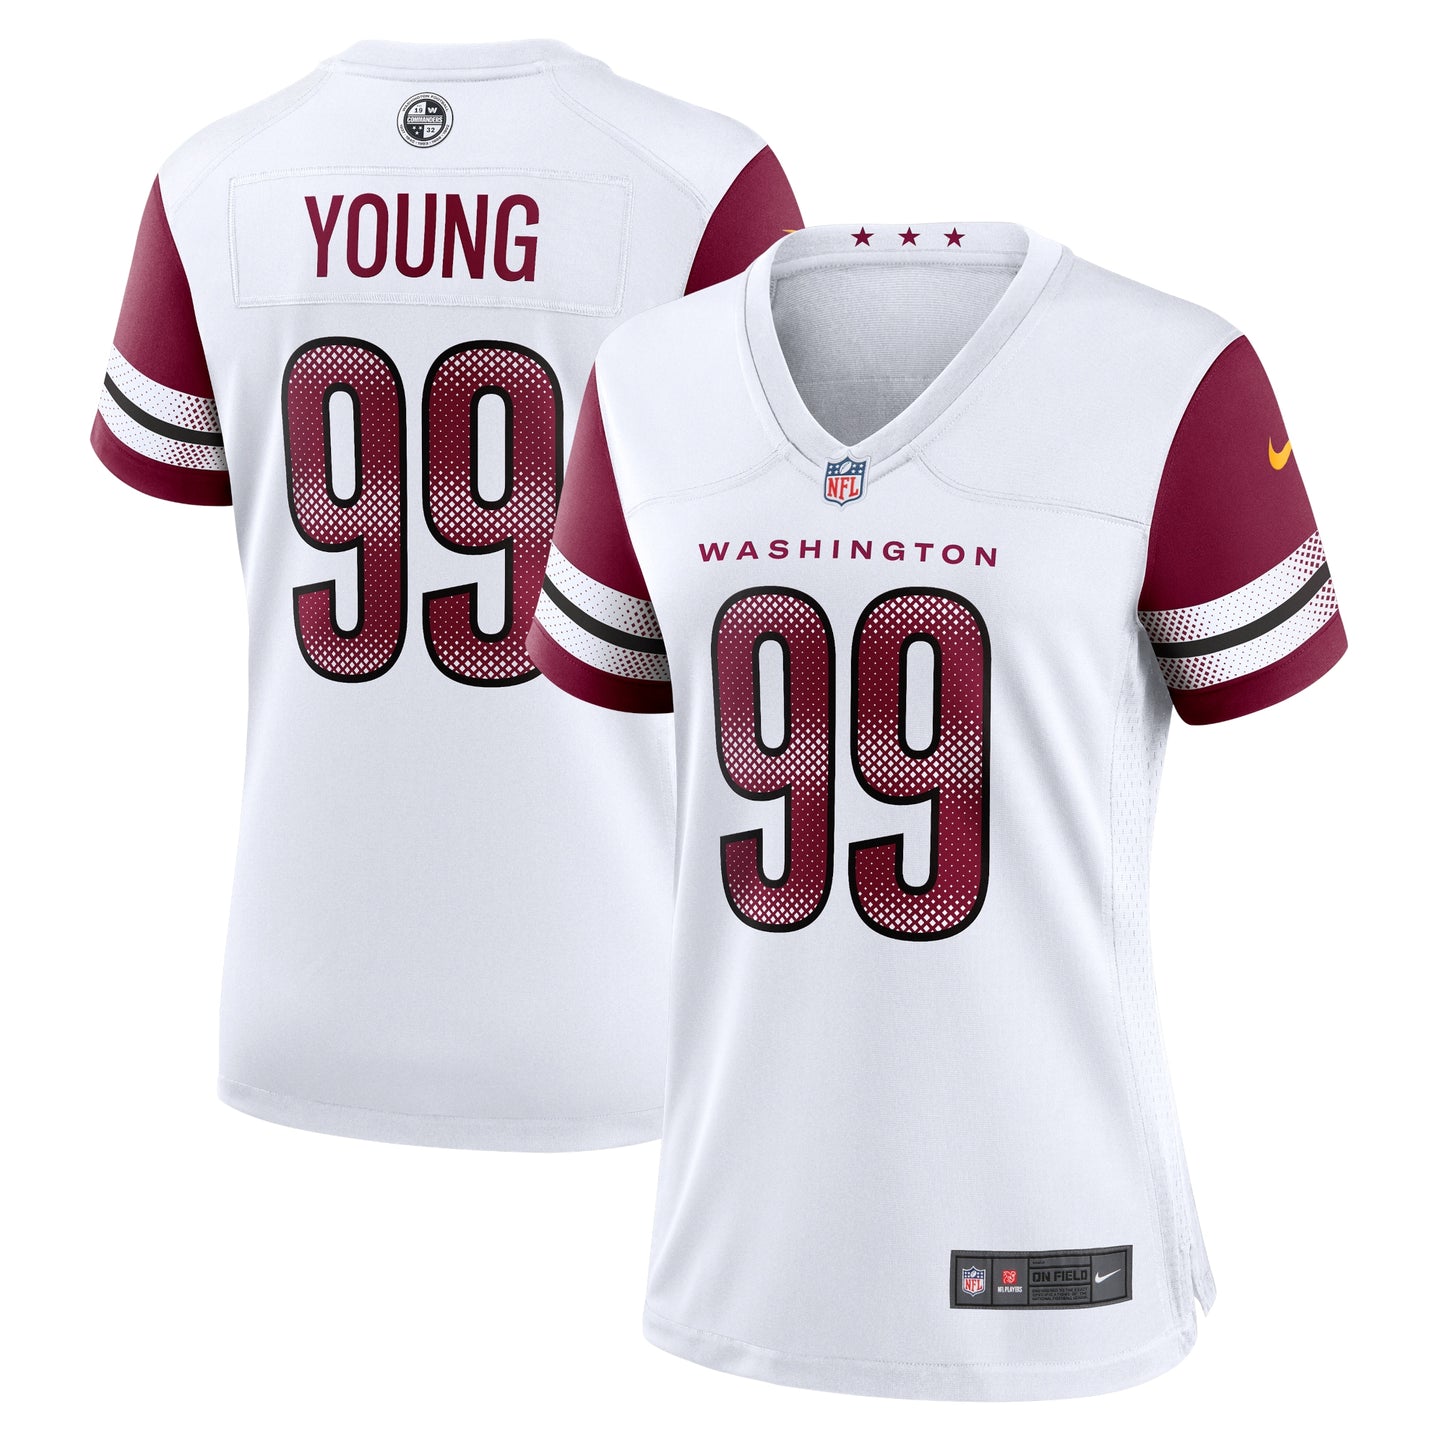 Chase Young Washington Commanders Nike Women's Player Jersey - White